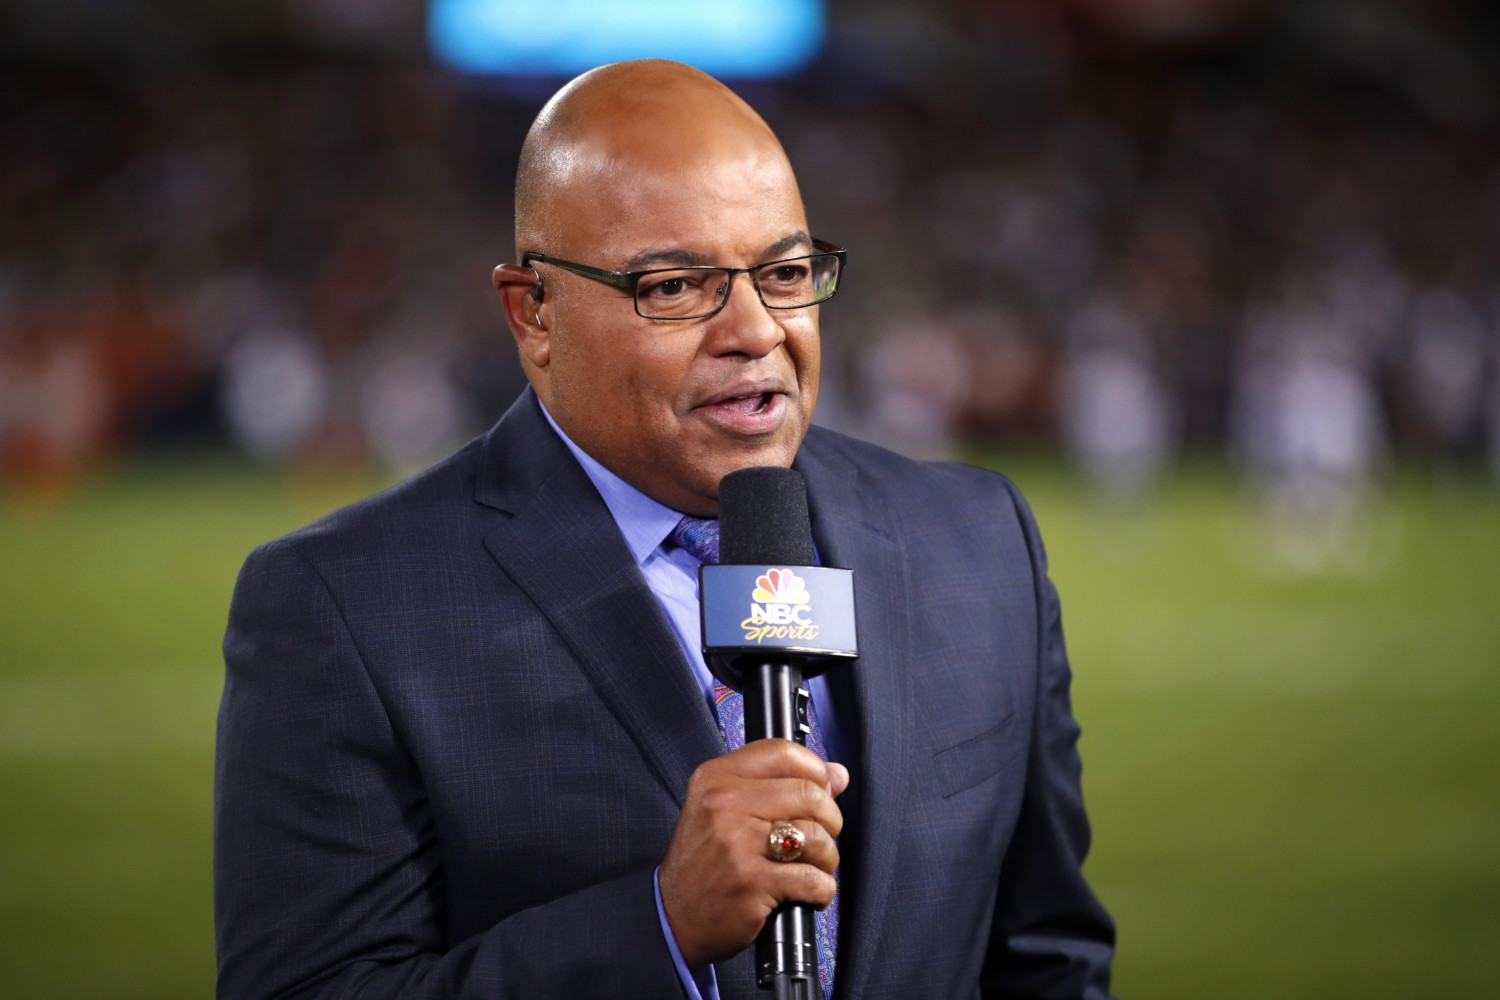 Mike Tirico broadcasts an NFL game on NBC Sports.